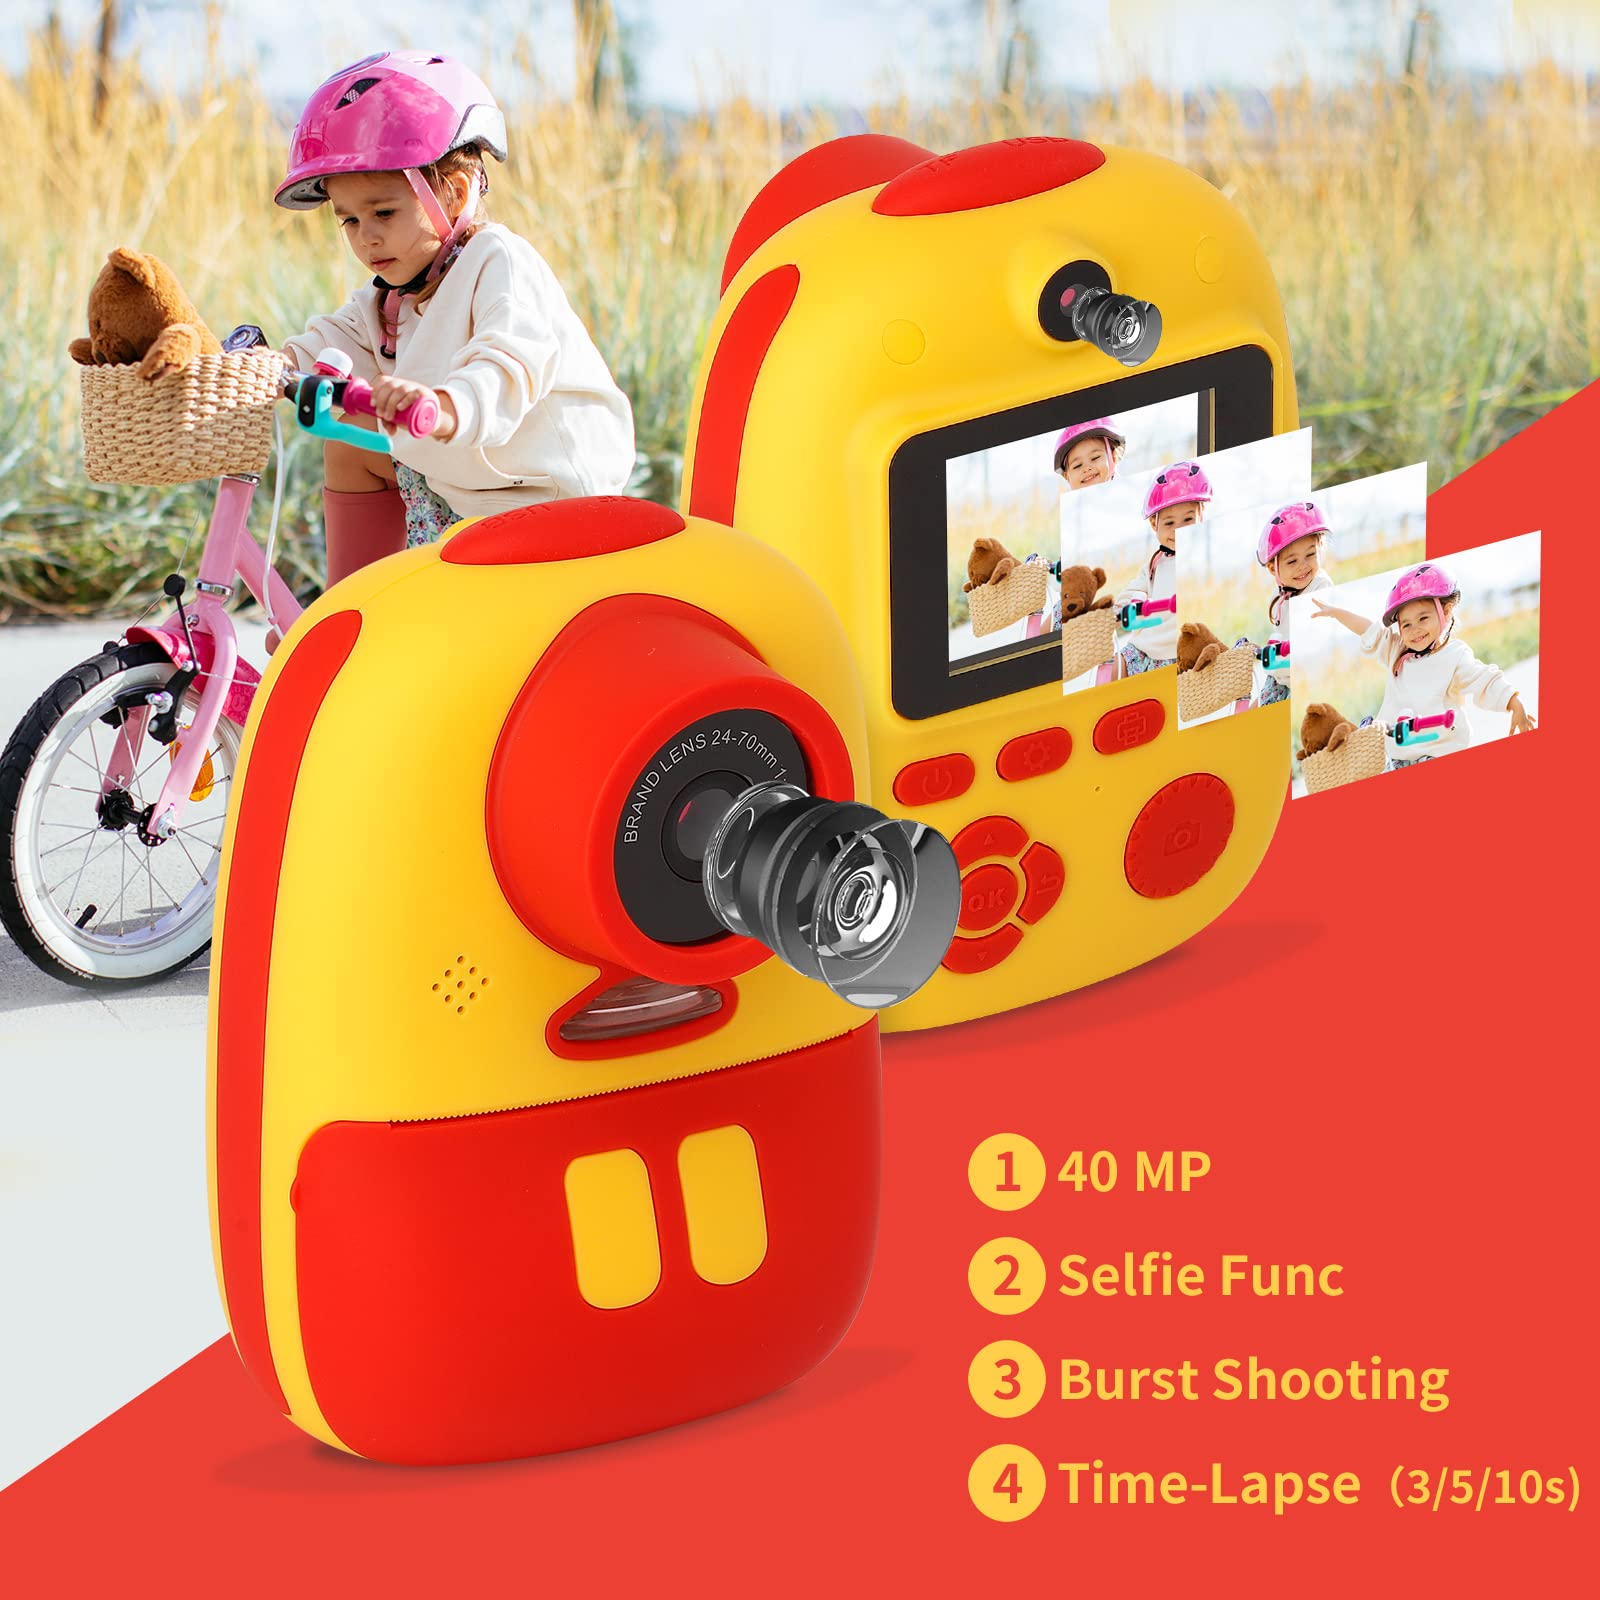 FTXOAM 1080P Kids Camera Instant Print Toddler Digital Camera with Colored Pens, Toy Camera with Print Paper for Boys and Girls, 32GB Card,Ink-Free Printing, Birthday Day Gift (Yellow Red)